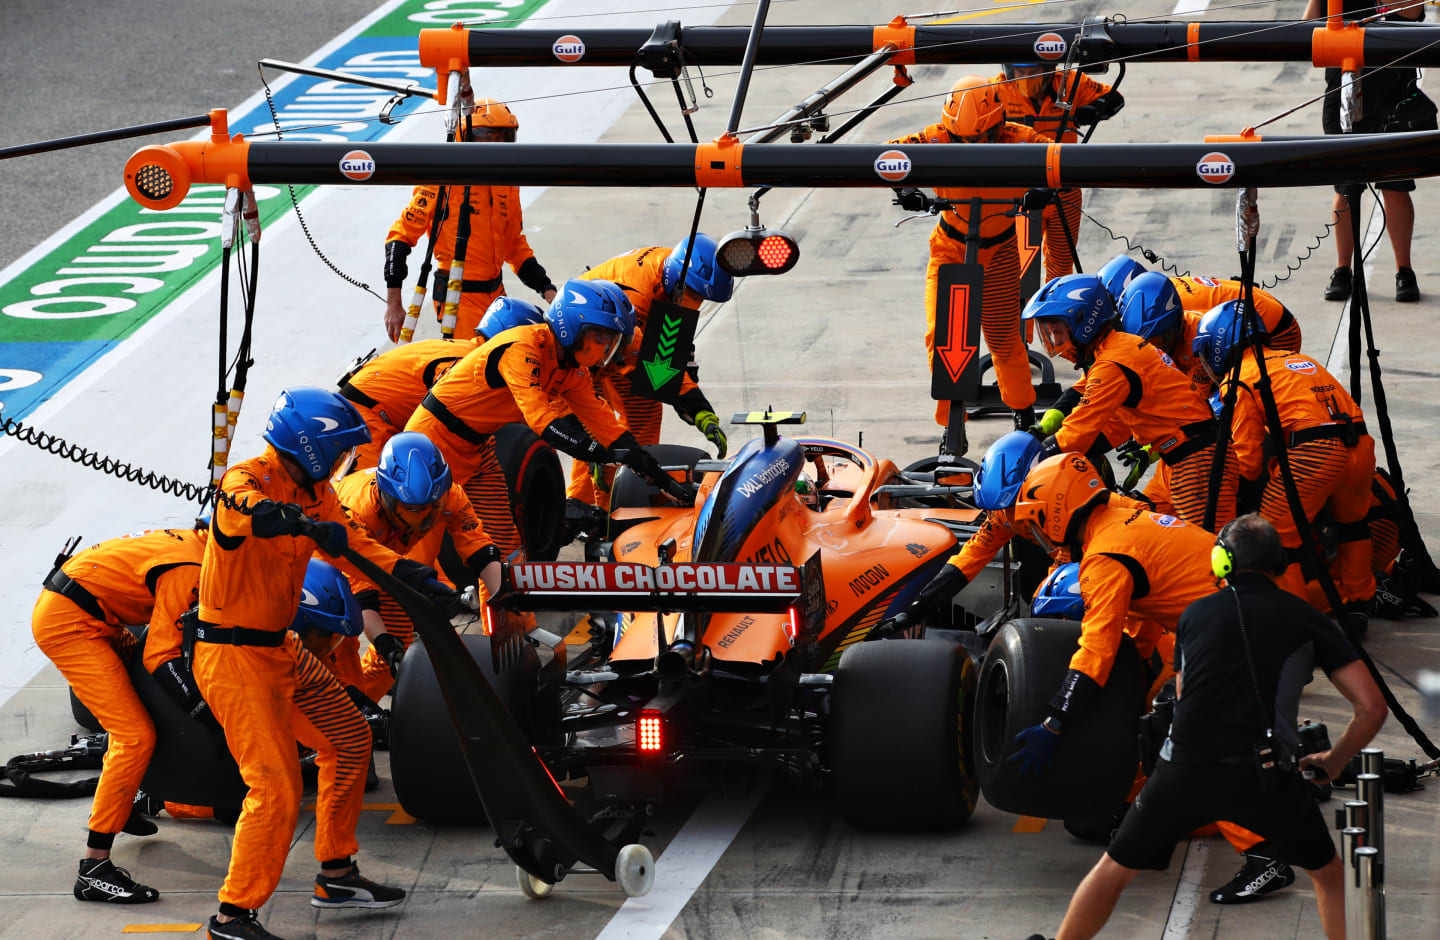 IMOLA, ITALY - NOVEMBER 01: Lando Norris of Great Britain driving the (4) McLaren F1 Team MCL35 Renault makes a pitstop during the F1 Grand Prix of Emilia Romagna at Autodromo Enzo e Dino Ferrari on November 01, 2020 in Imola, Italy. (Photo by Mark Thompson/Getty Images)